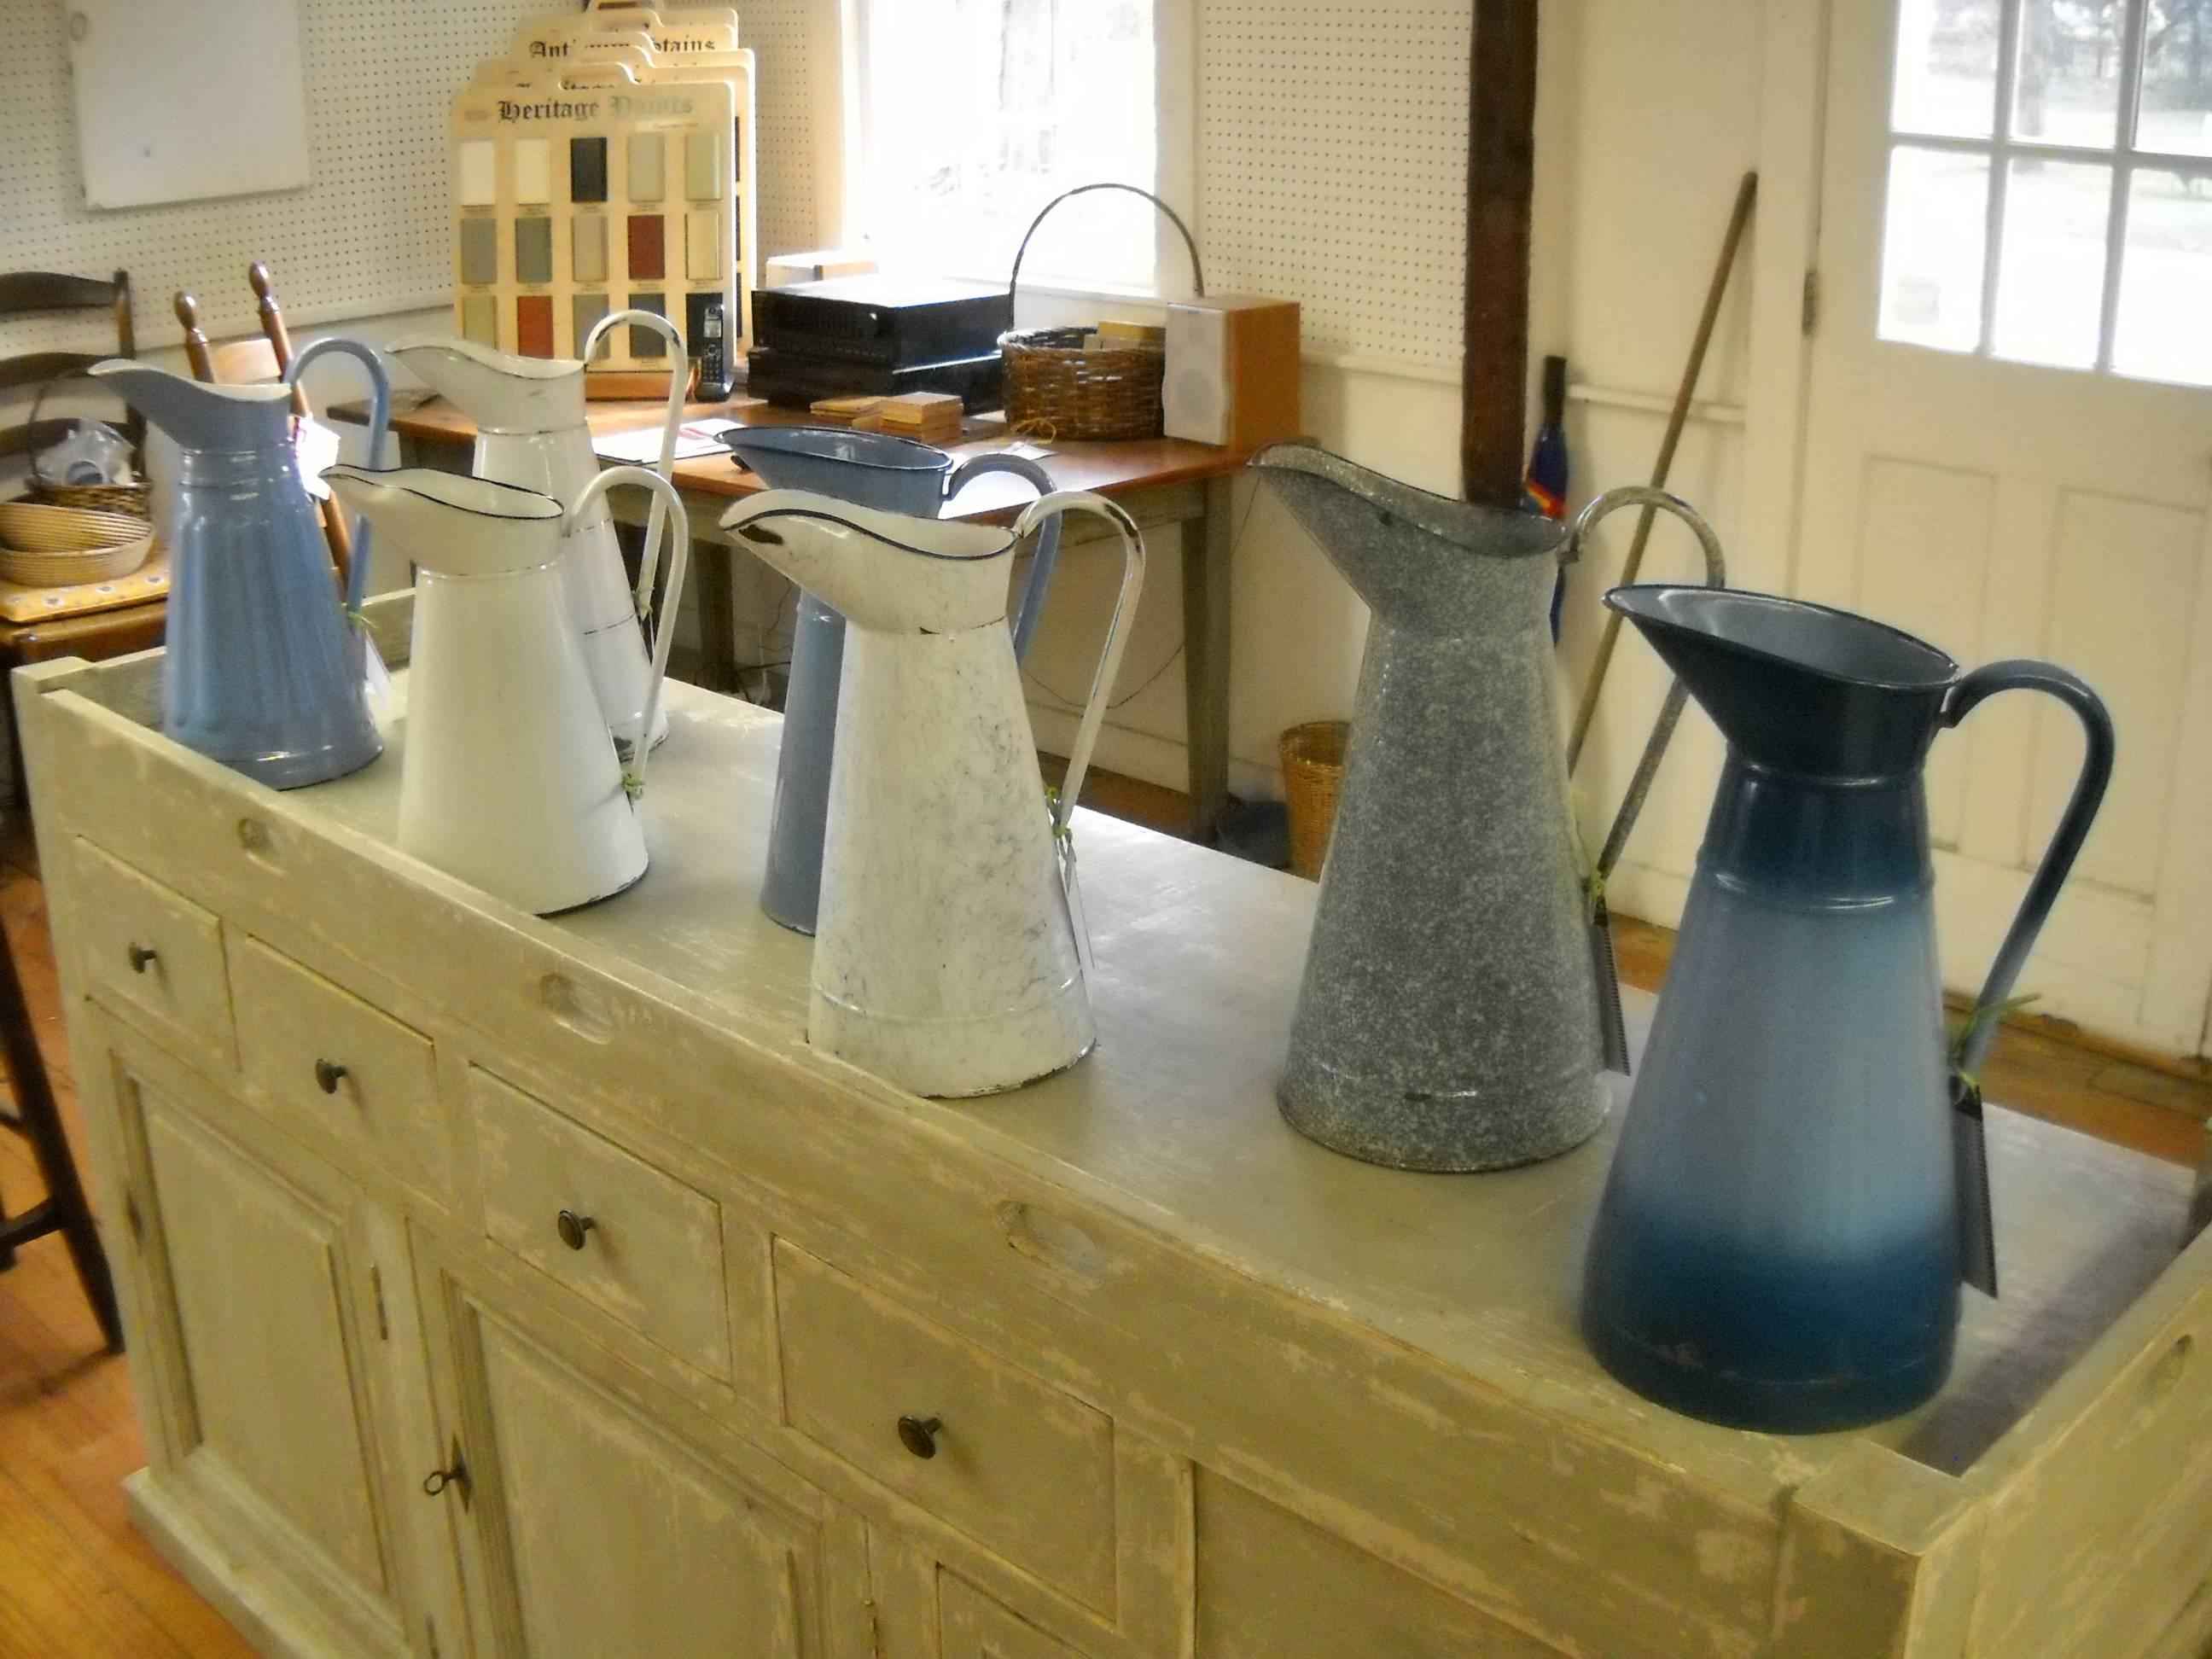 These are half of our French pitchers. We currently have 14 pitchers and these are seven of them. They are sold individually and each is unique and very special. They are all a similar height and diameter. This is the best collection of pitchers we